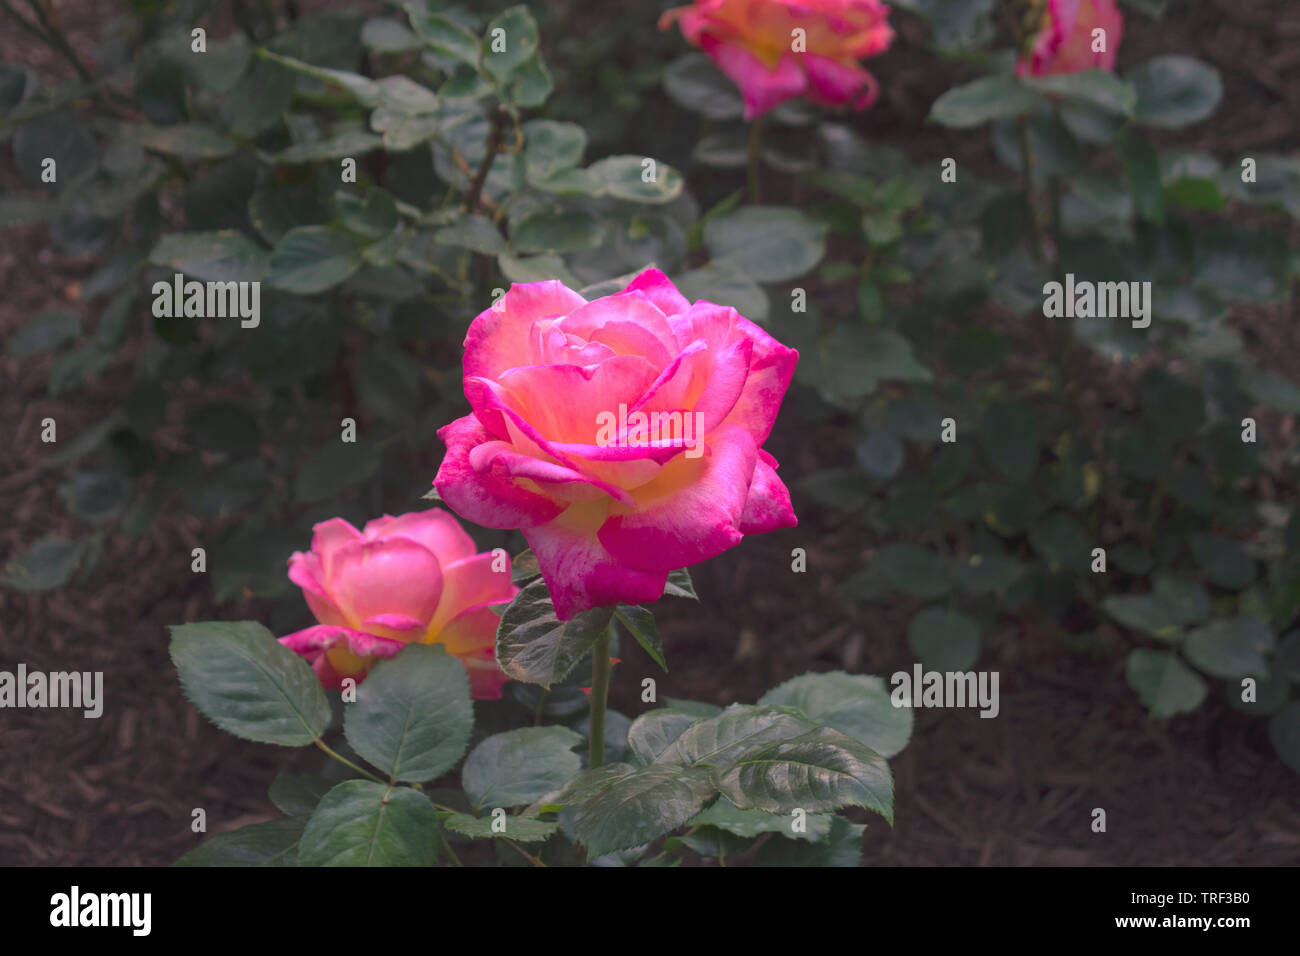 Several large pink roses surrounded by dark green leaves Stock Photo